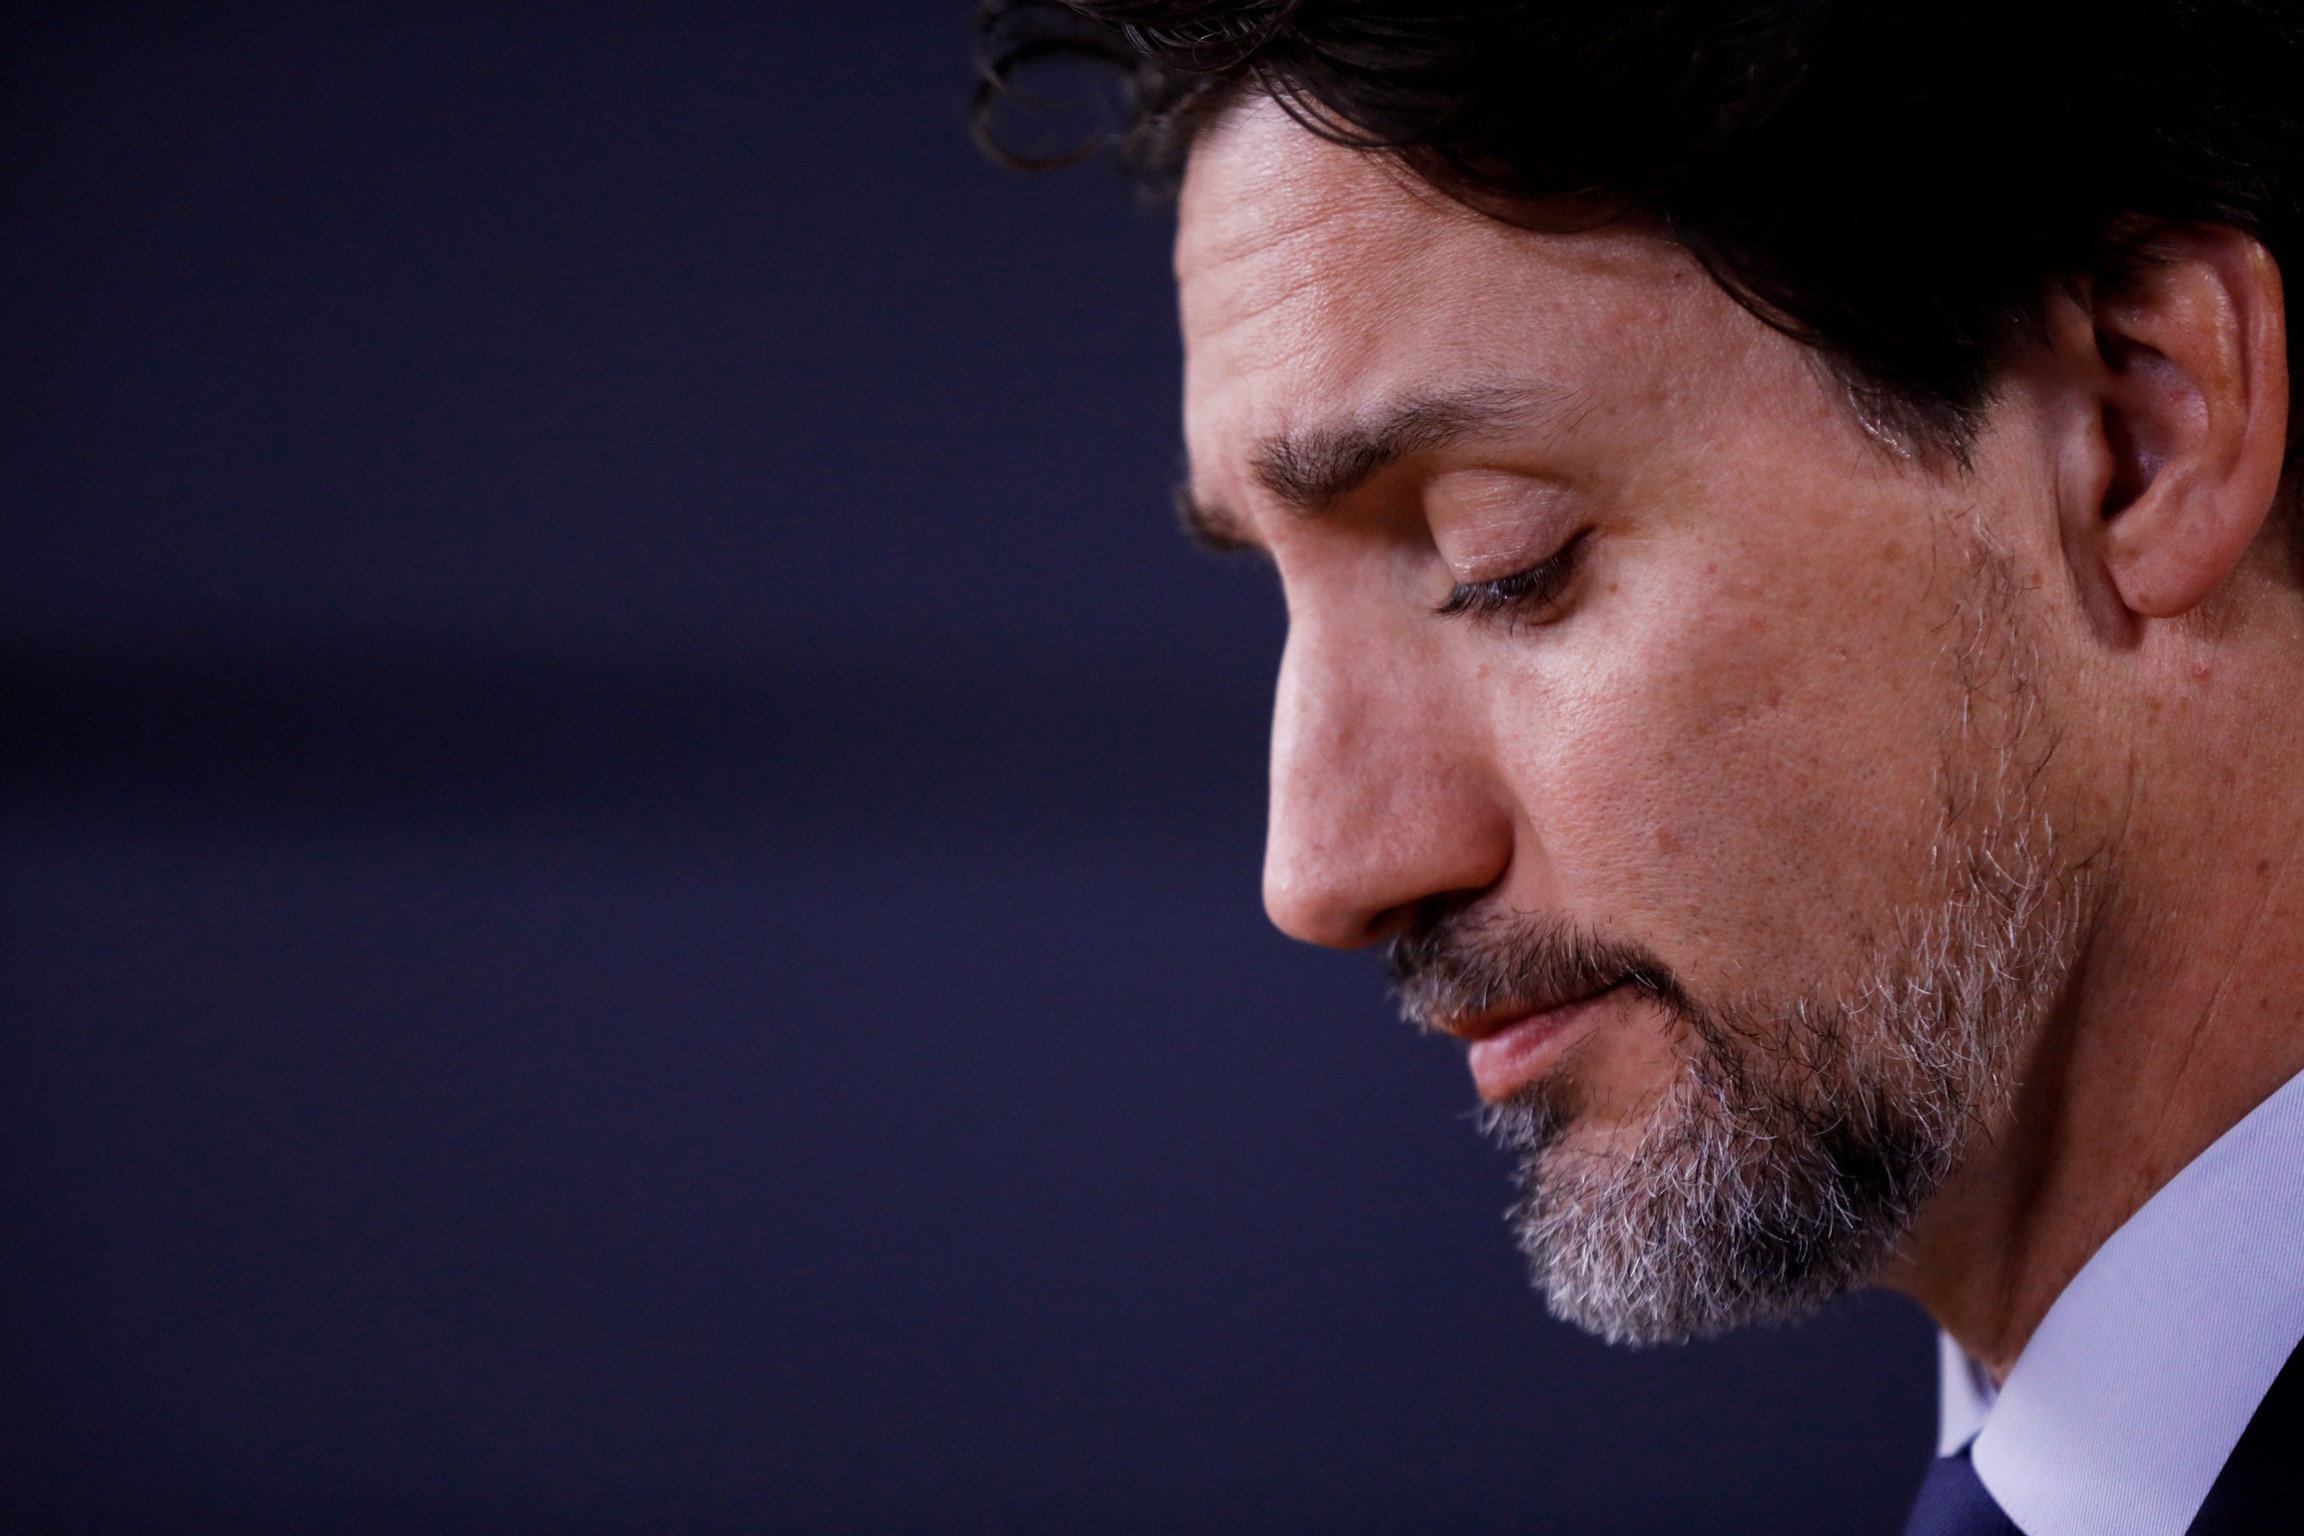 Canada's Prime Minister Justin Trudeau attends a news conference about flight PS752 from Tehran to Kiev that crashed shortly after takeoff, in Ottawa, Ontario, Canada Jan. 8, 2020. REUTERS/Blair Gable 